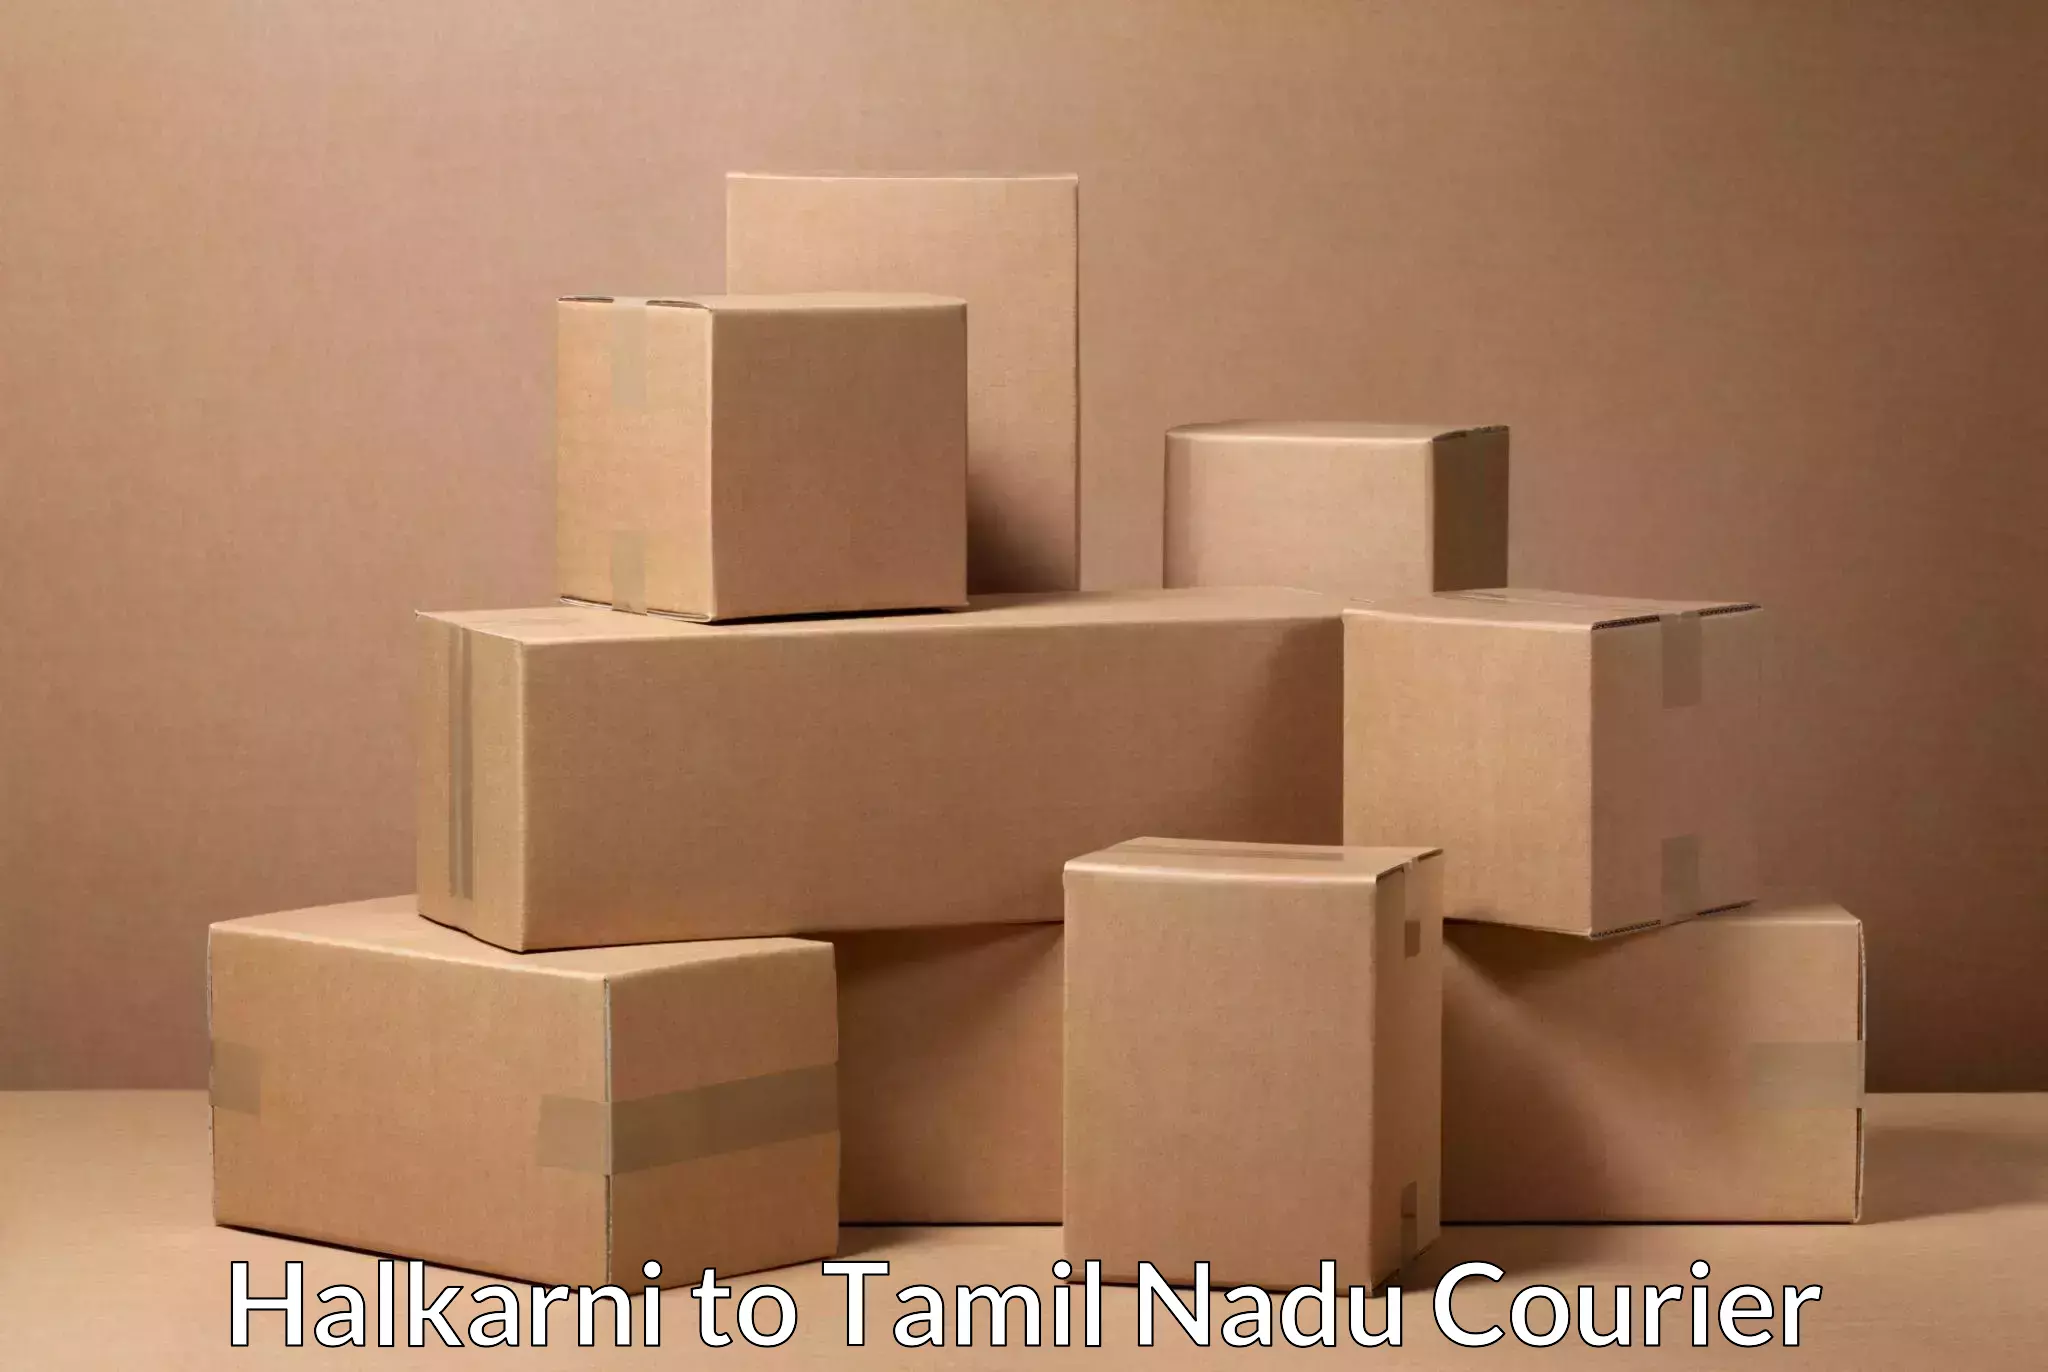 Quality courier services in Halkarni to Pudukkottai